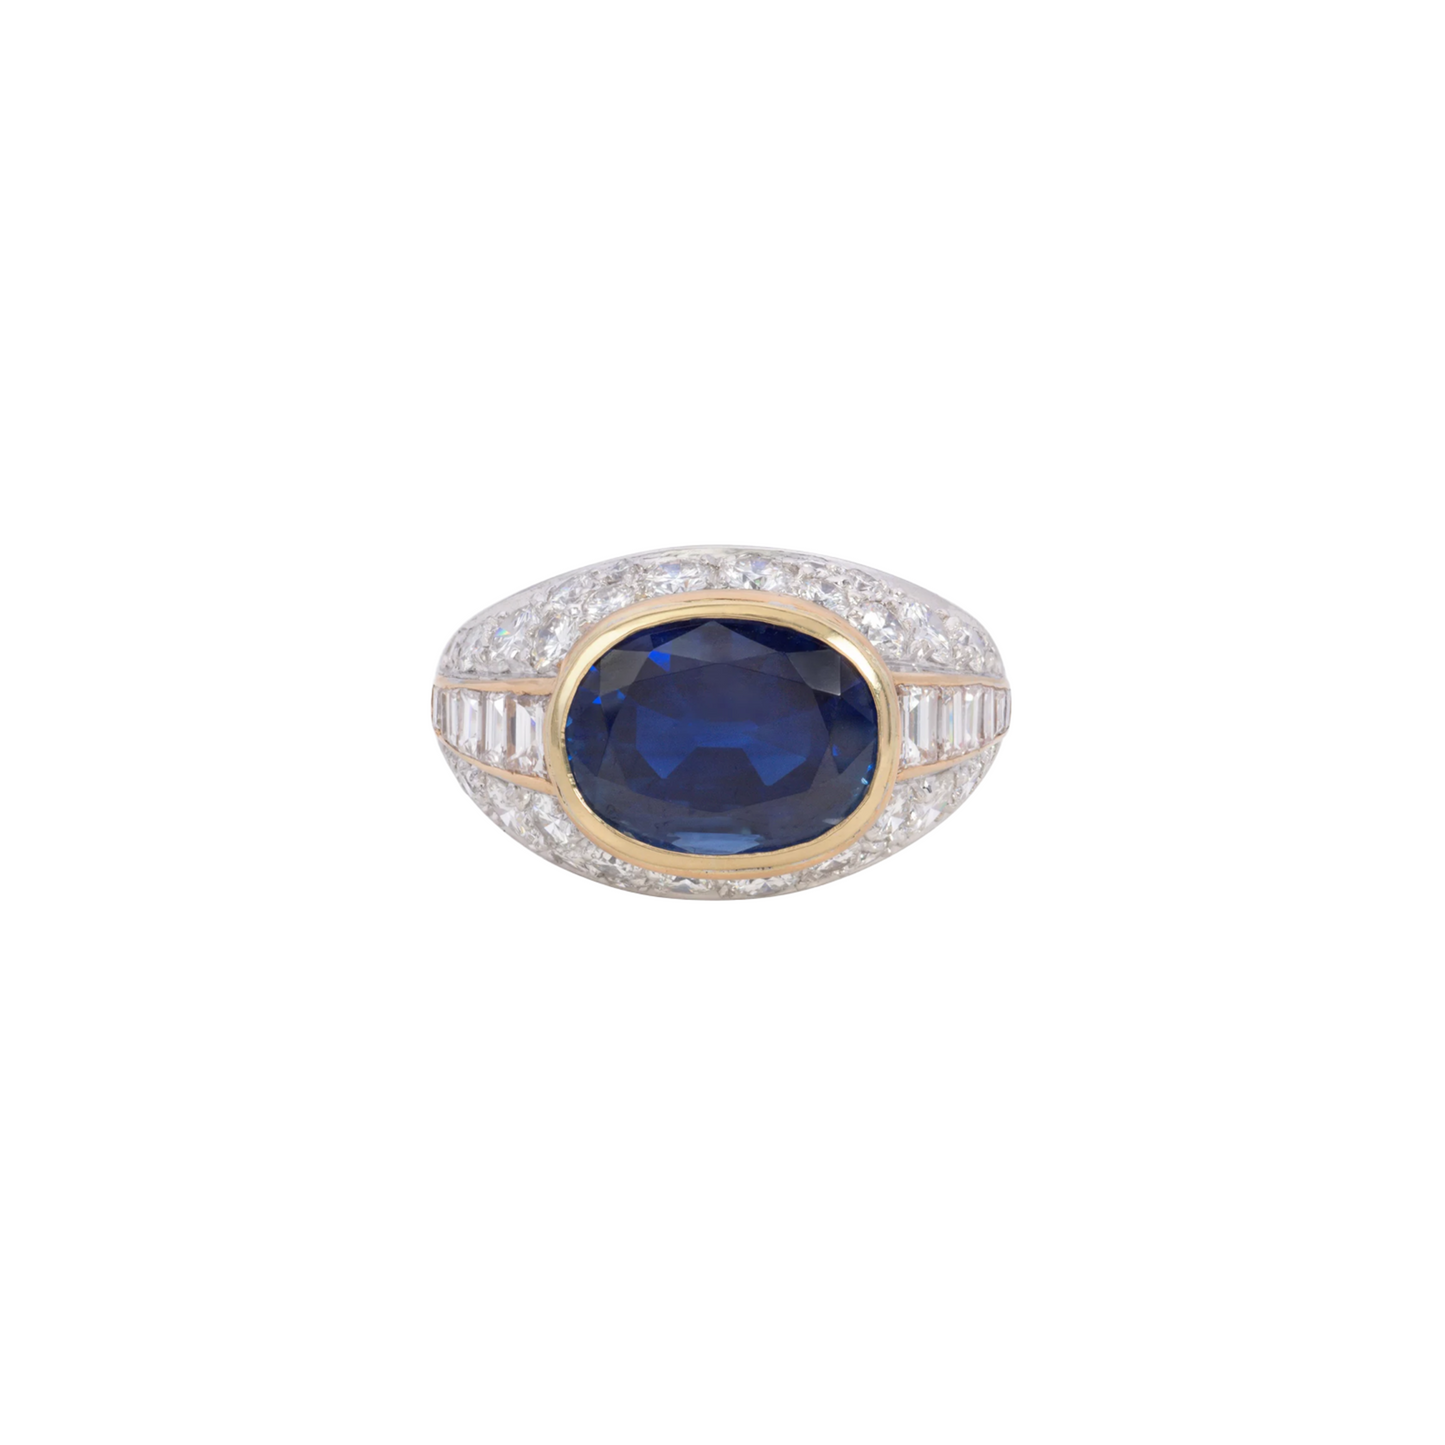 1970s 18KT Yellow & White Gold Sapphire Diamond Ring front